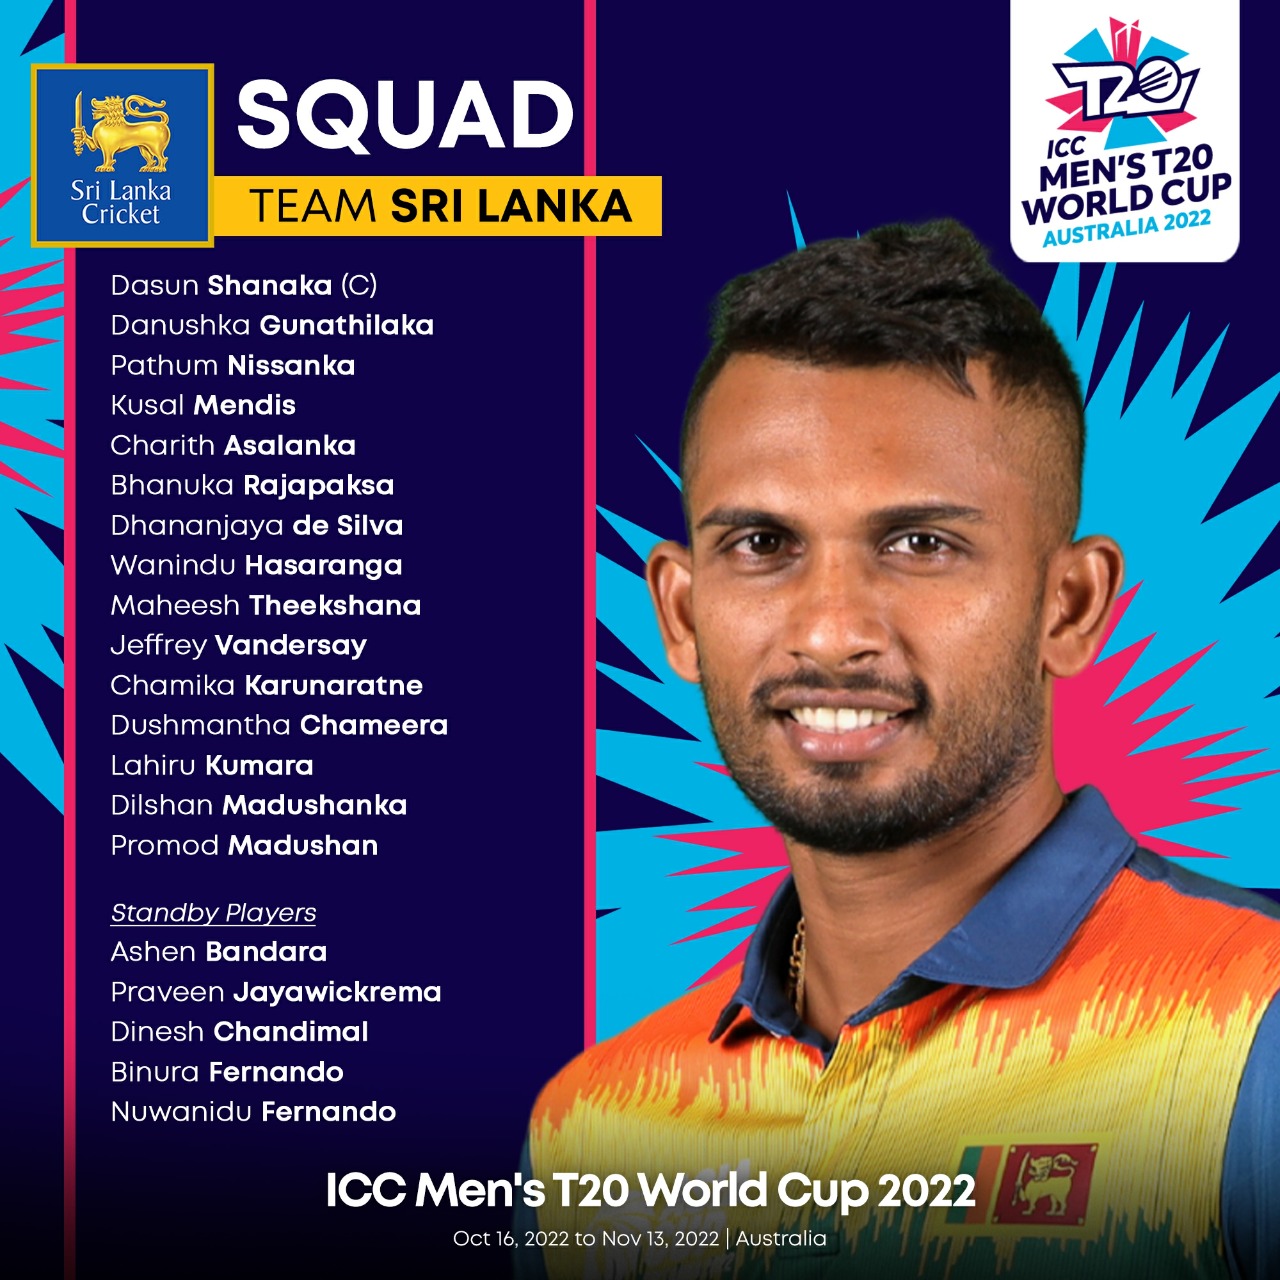 ICC T20 World CUP: Asian Champions Sri Lanka departs for World CUP, Check full schedule of Dasun Shanaka’s team, T20 World CUP Qualifiers Draws & Follow LIVE UPDATES